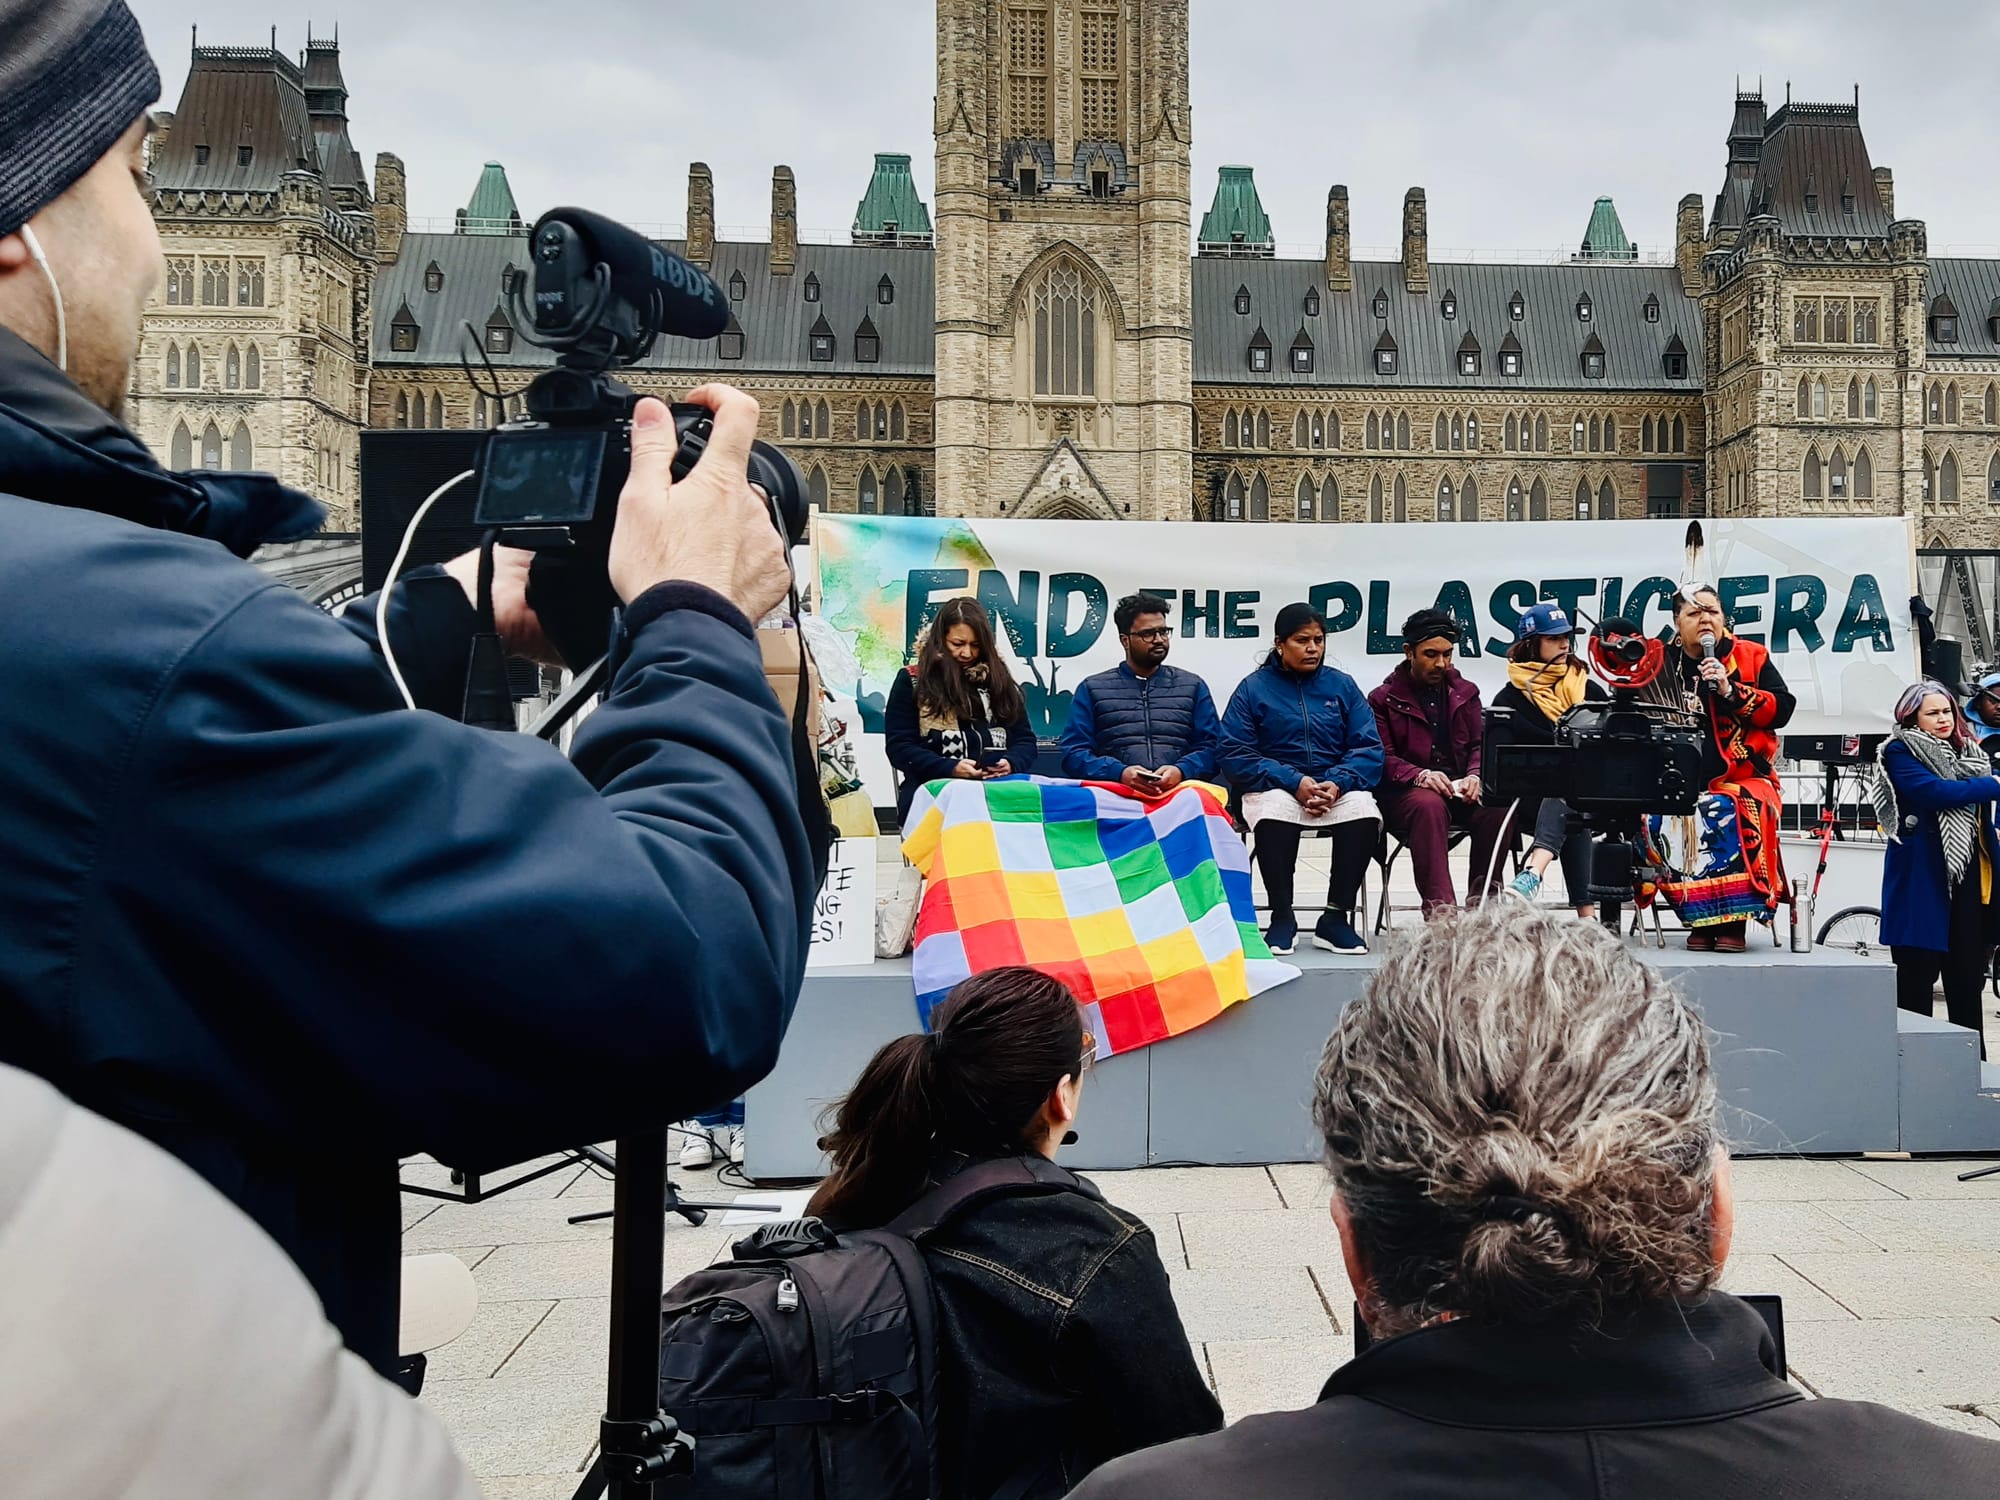 A panel of people campaign against plastics in Ottawa